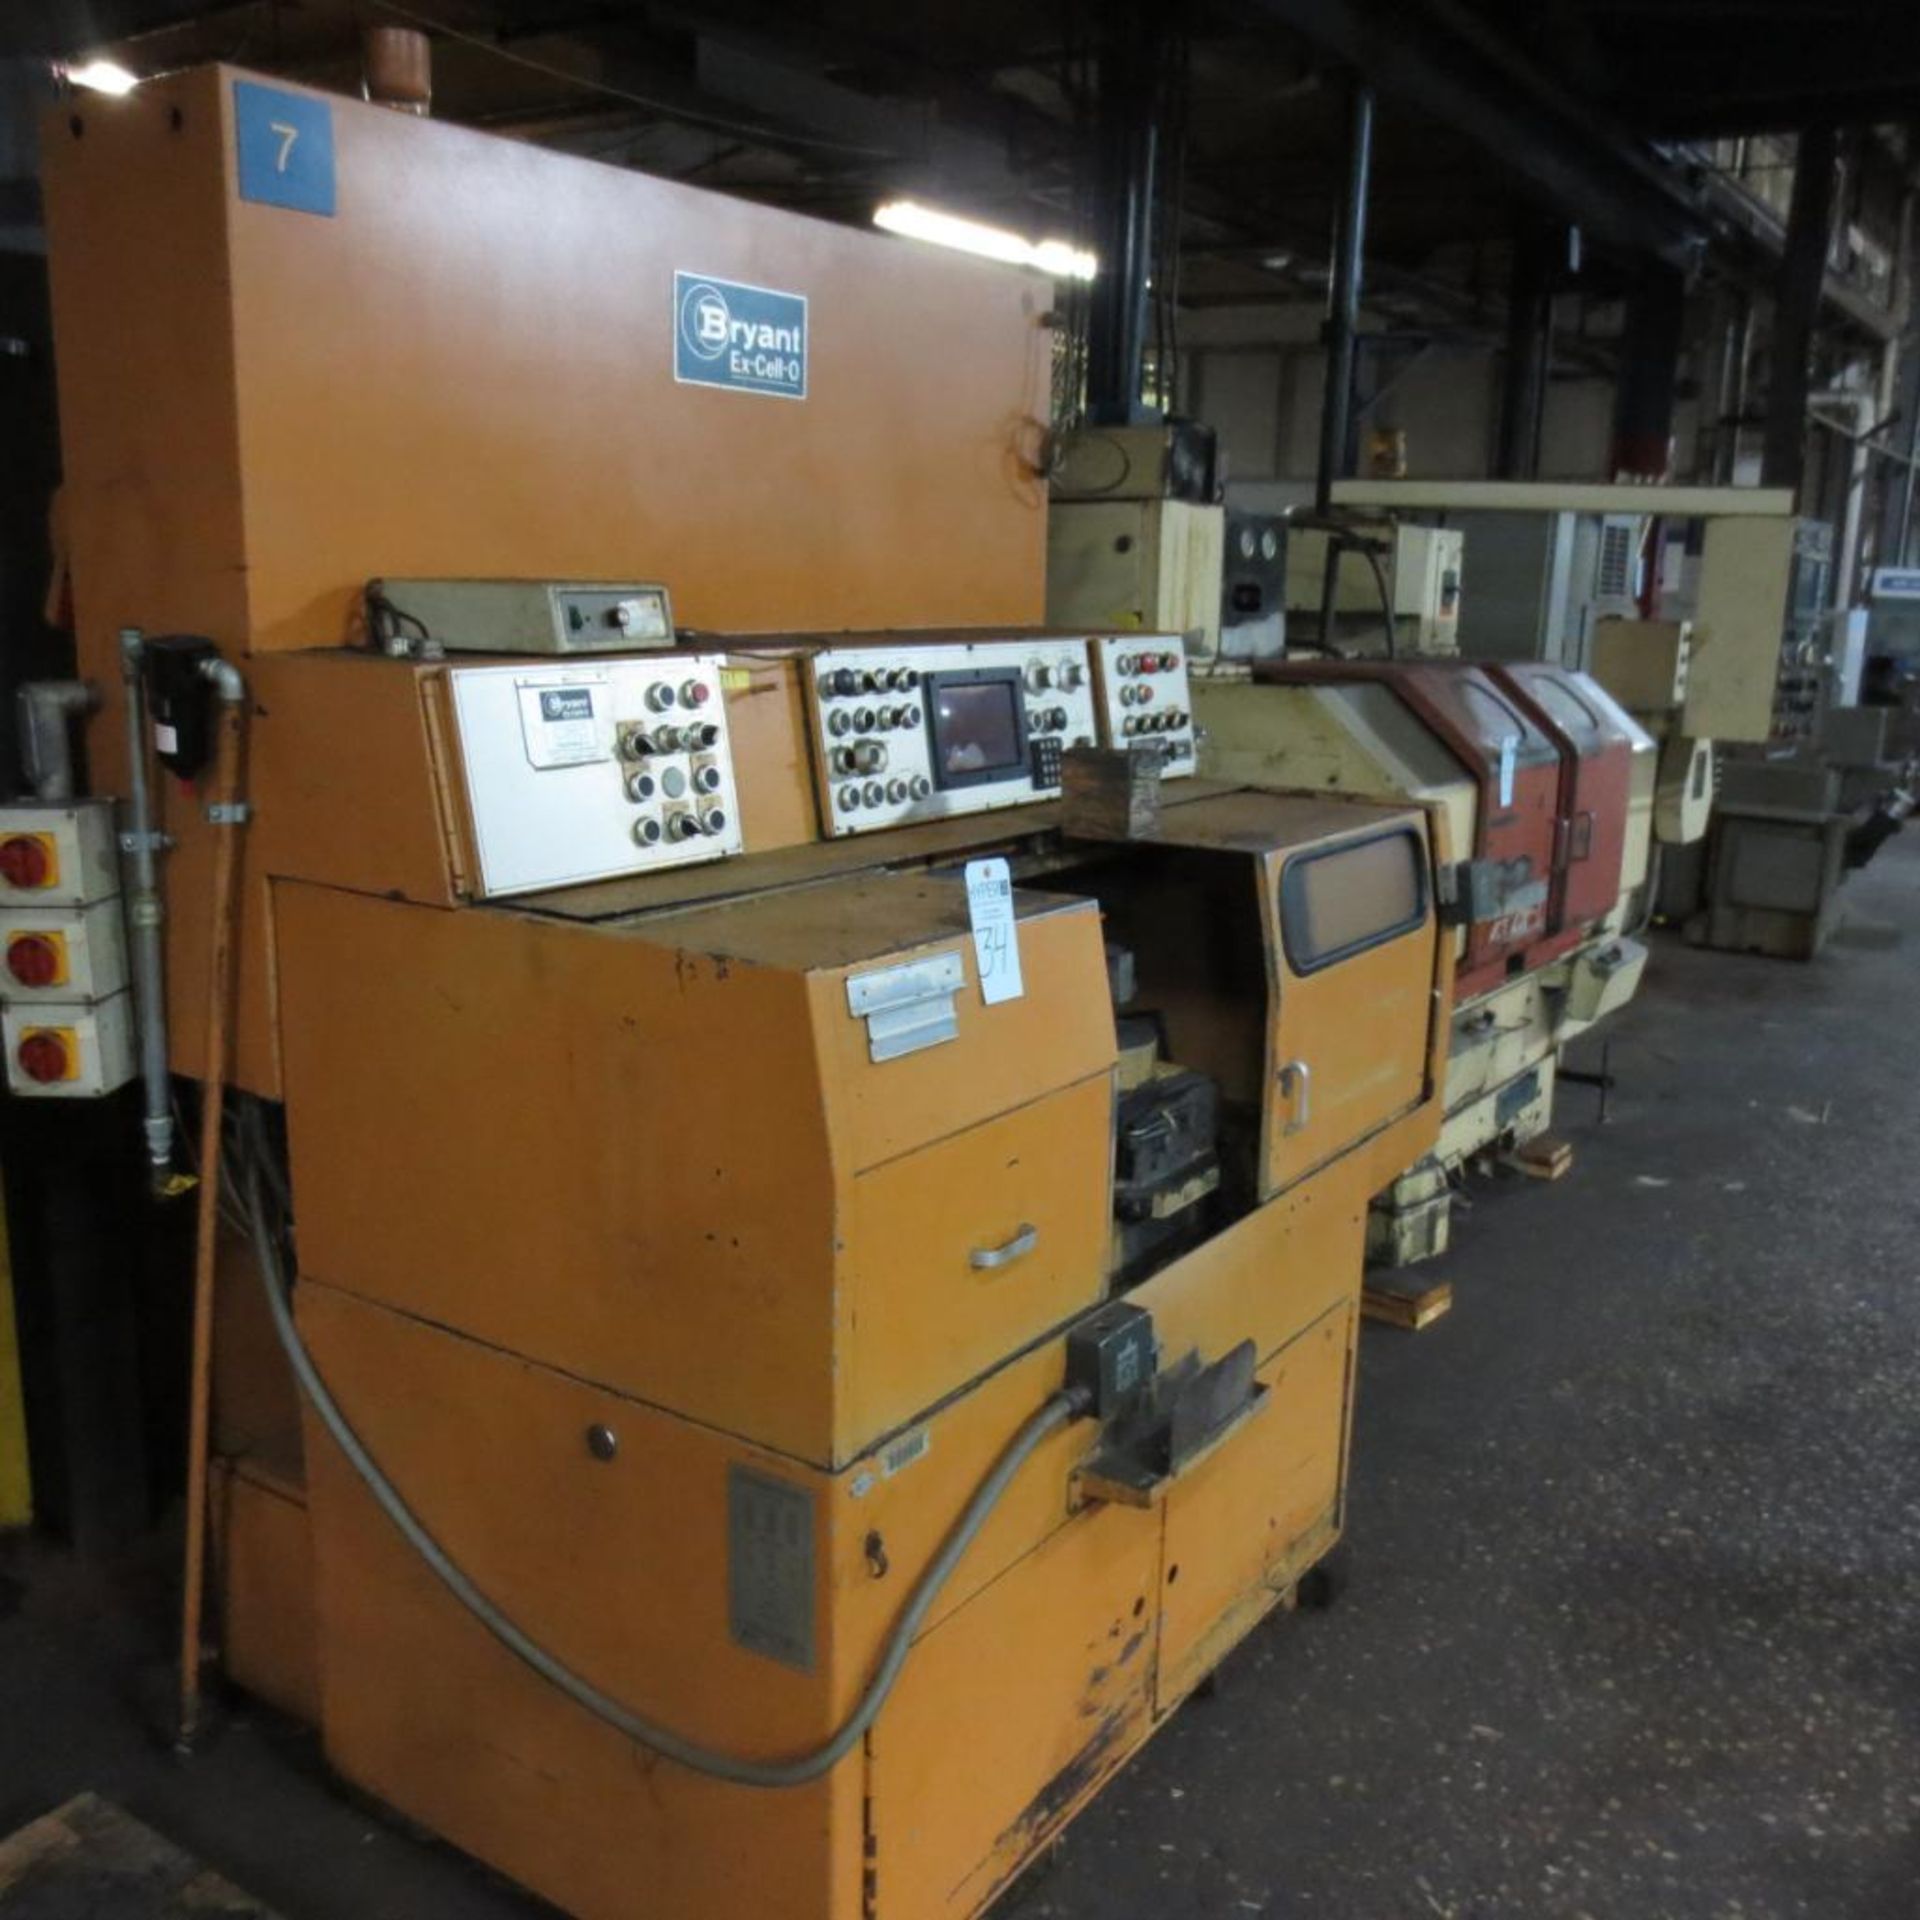 Bryant EX-Cell-0 LL1-10 CNC Grinder, S/N W-16893. Loading Fee is $350.00 - Image 2 of 8